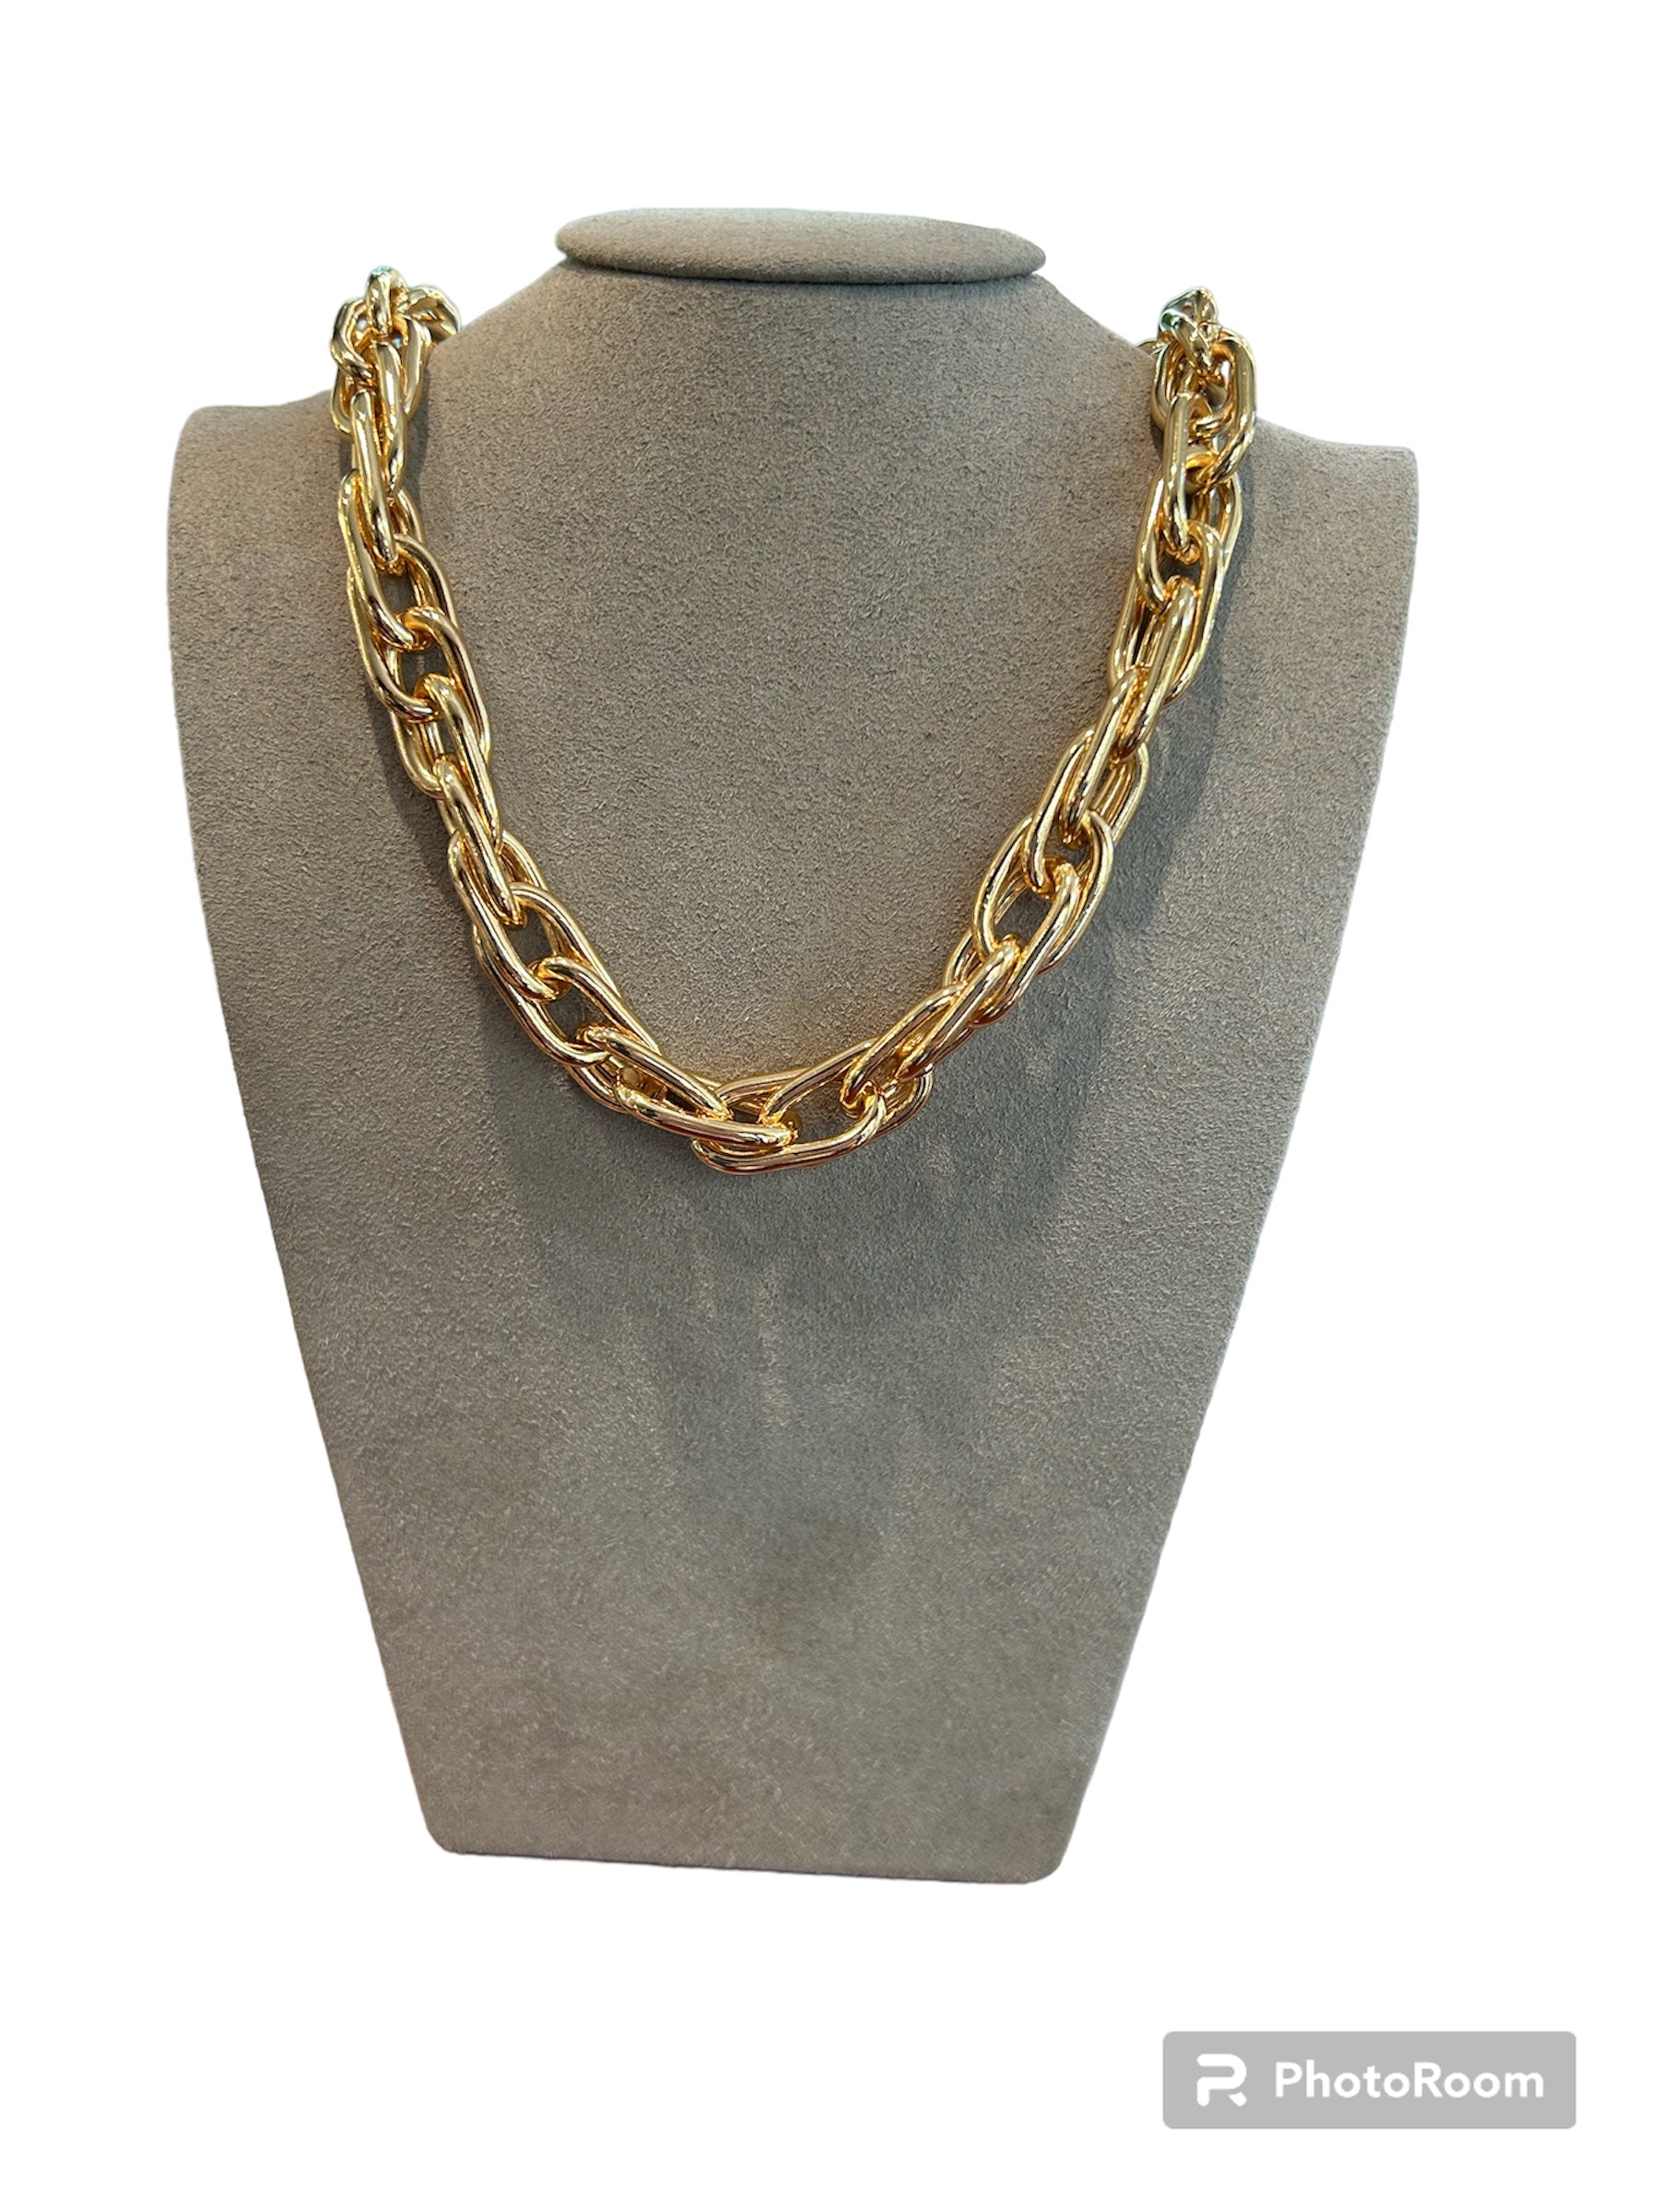 Gilded bronze necklace - MAGIC CL 133